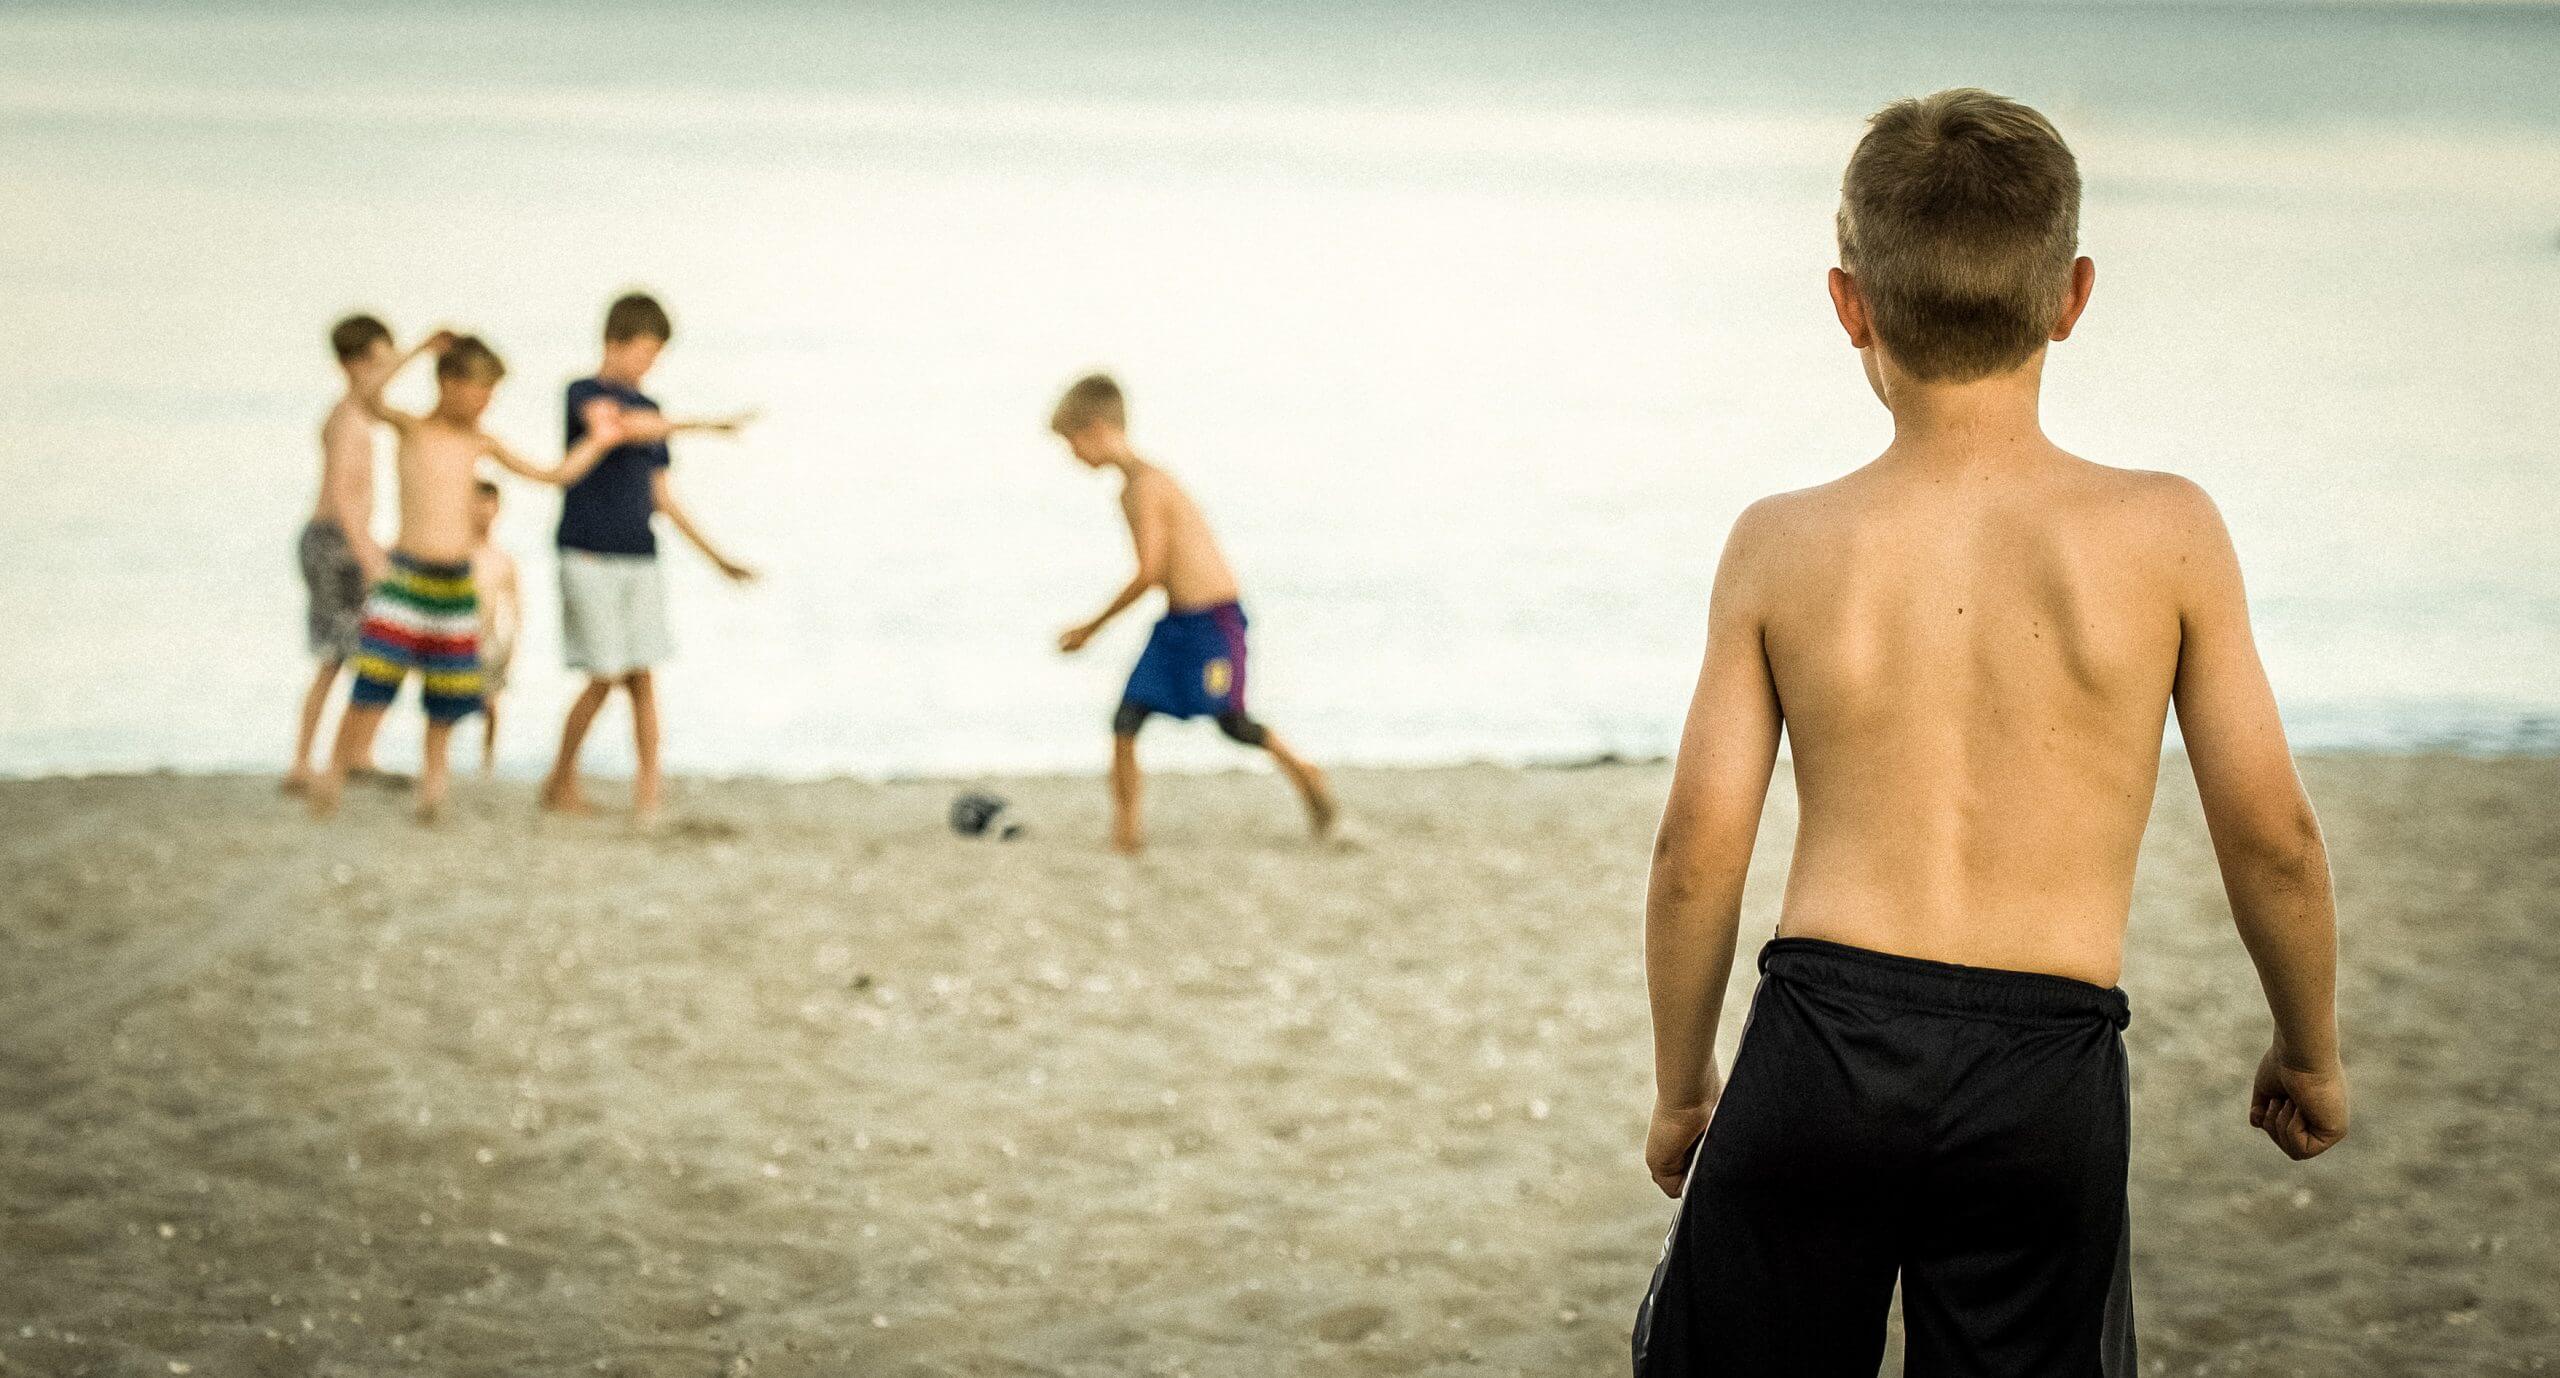 Children play at the beach. A focused view shows a boy looking toward a group of boys playing in front of him.